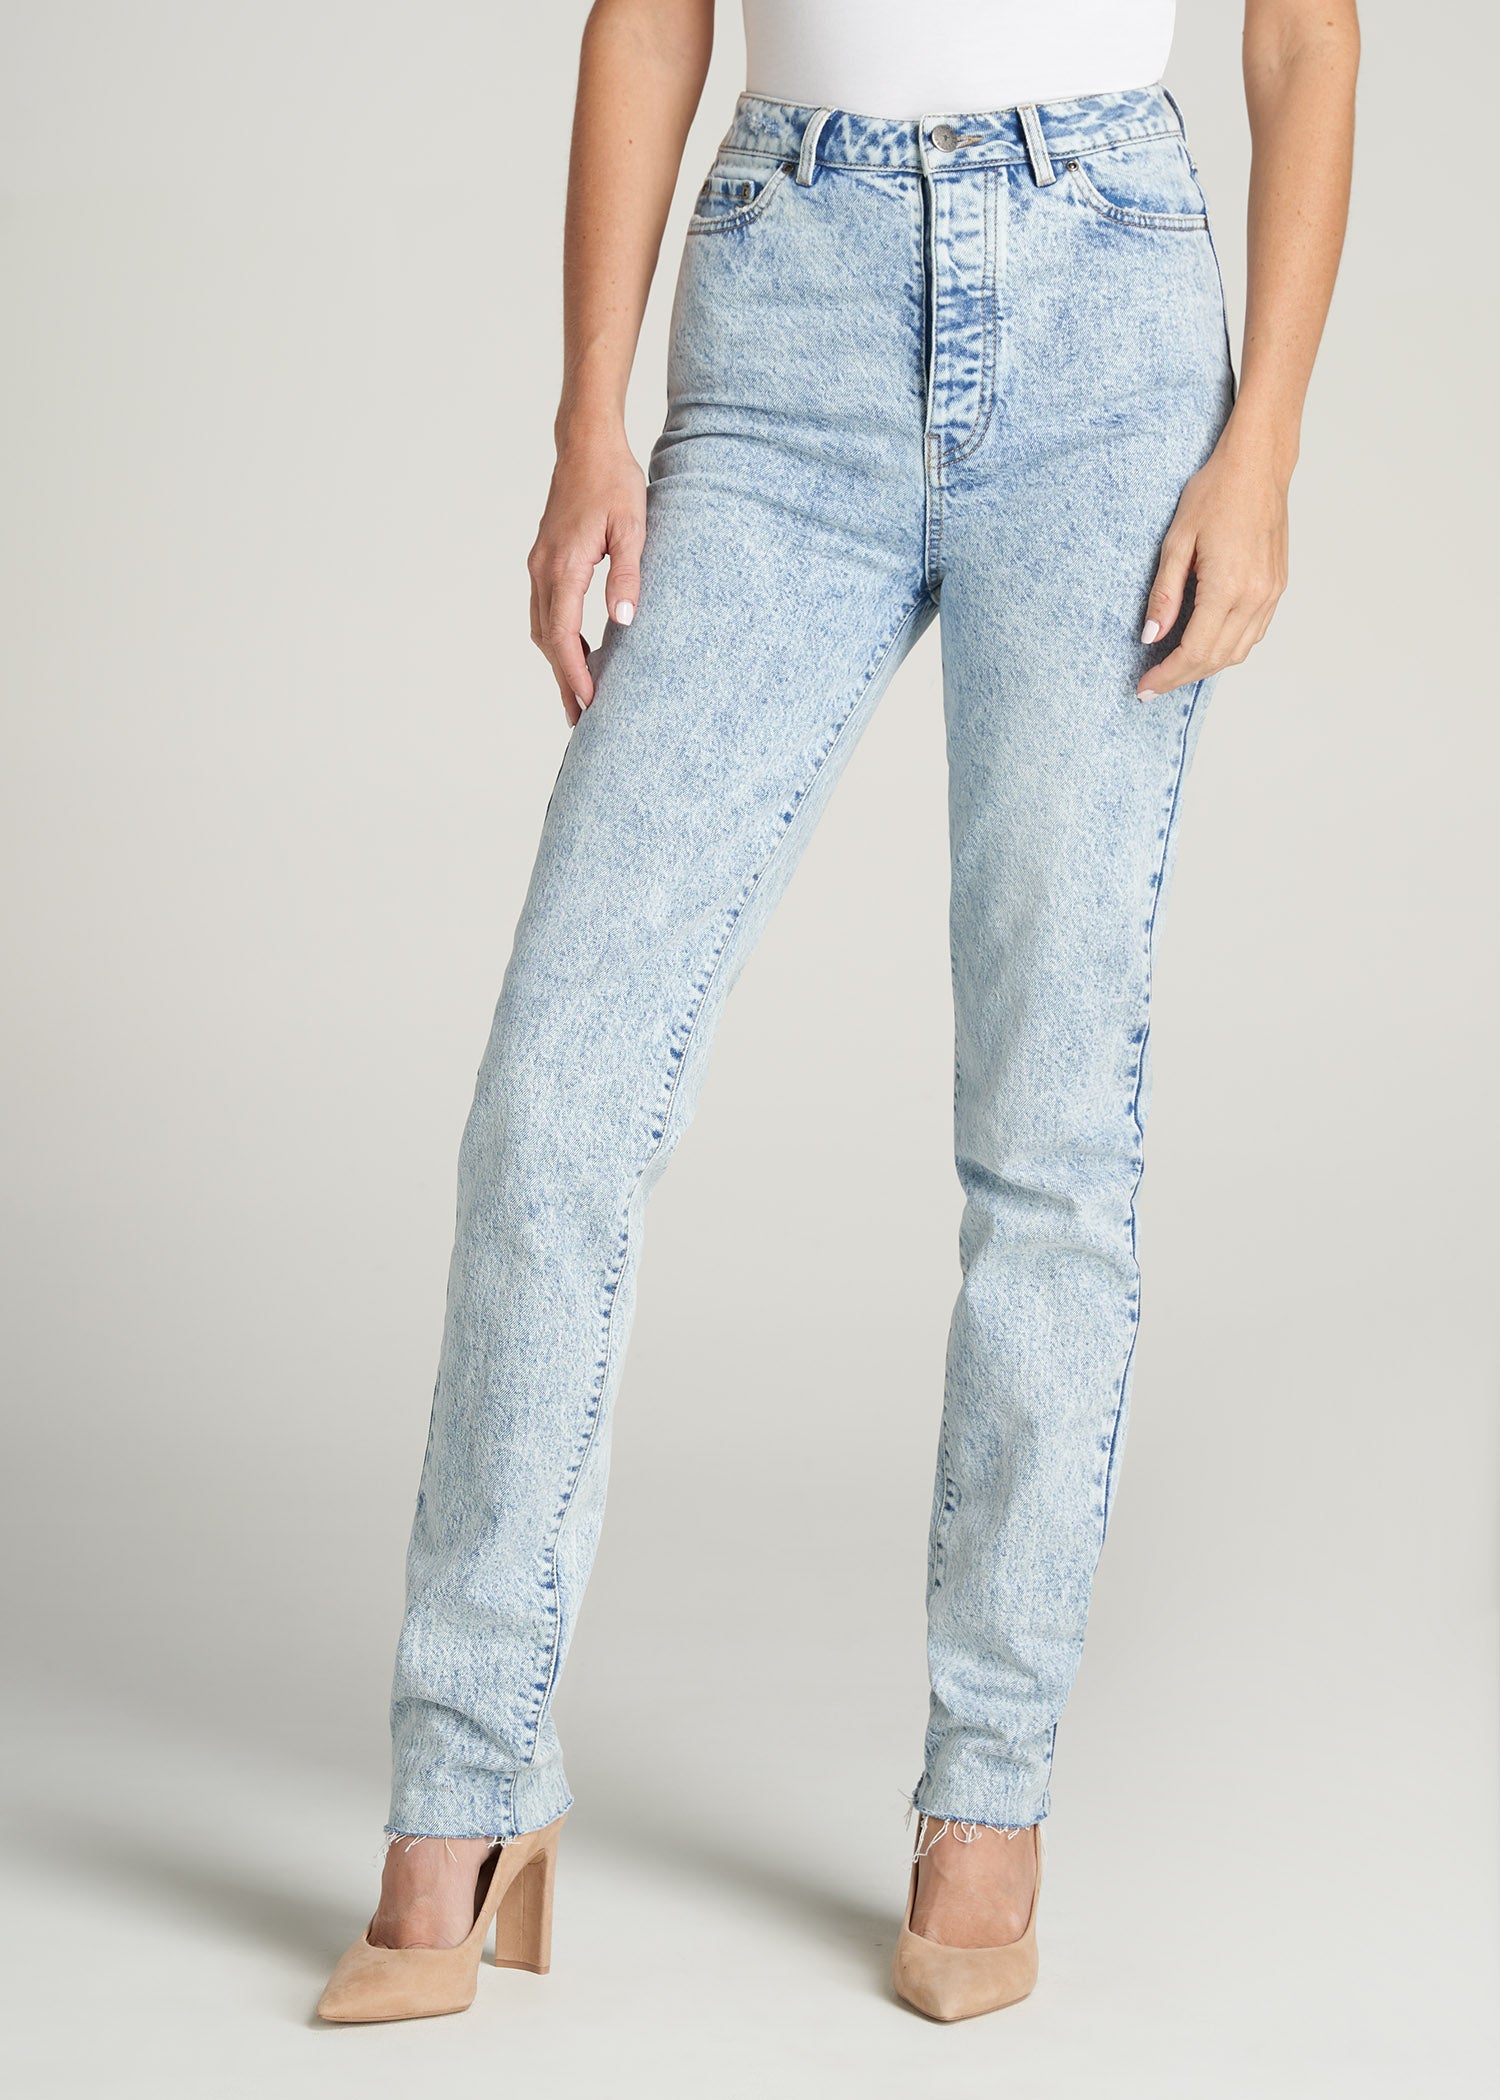 Stone Washed Jeans for Tall Women  Lola Stretch Slim-Fit – American Tall